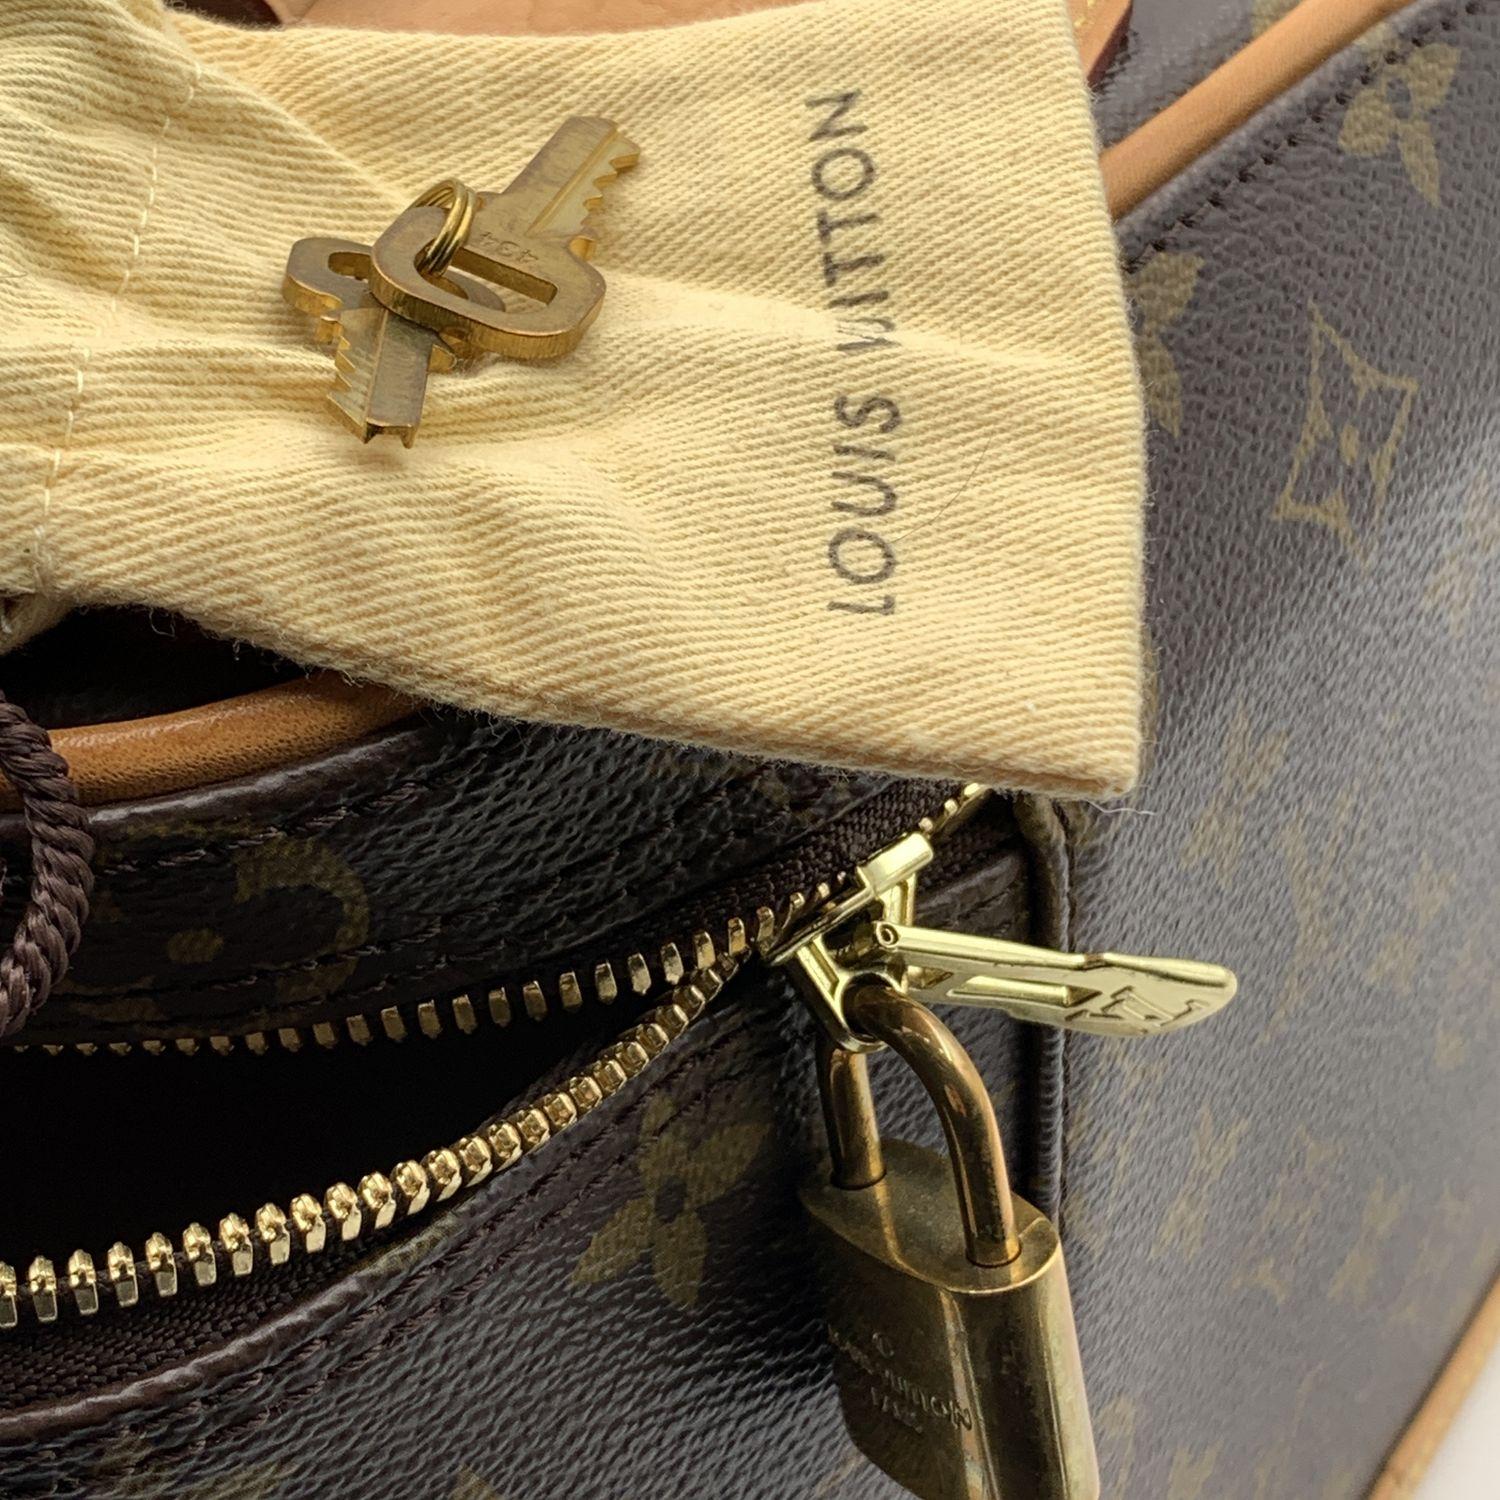 This beautiful Bag will come with a Certificate of Authenticity provided by Entrupy. The certificate will be provided at no further cost.

Louis Vuitton 'Nice' Travel beauty case. Monogram canvas and beige leather trim. The bag features a top